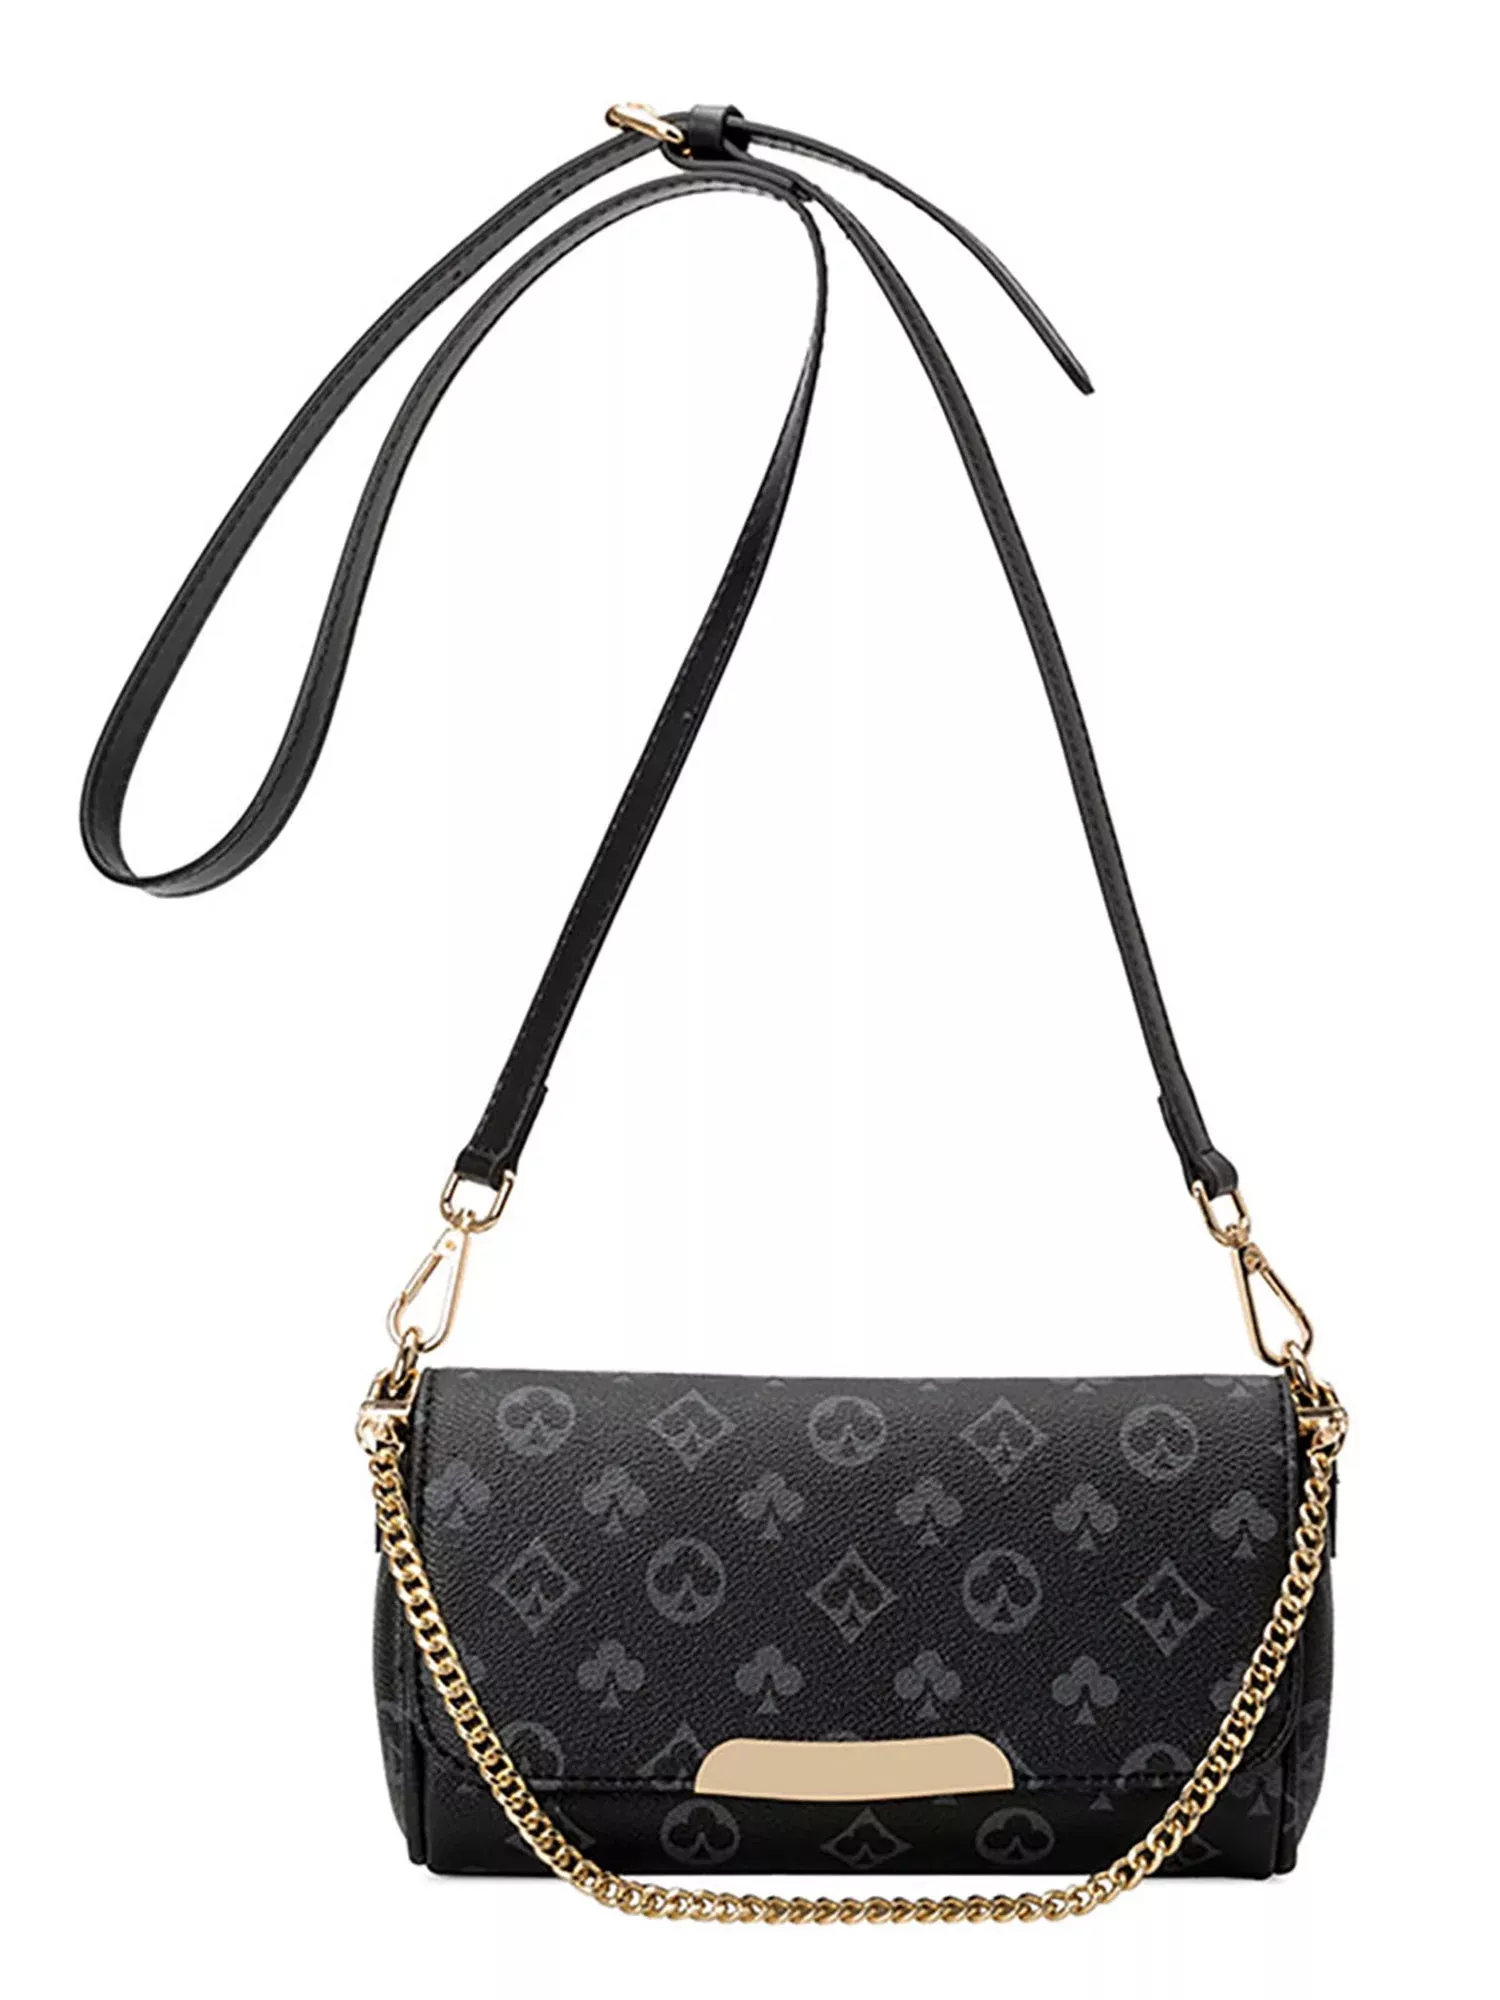 Sexy Dance Womens Checkered Tote Shoulder Bag,PU Vegan Leather